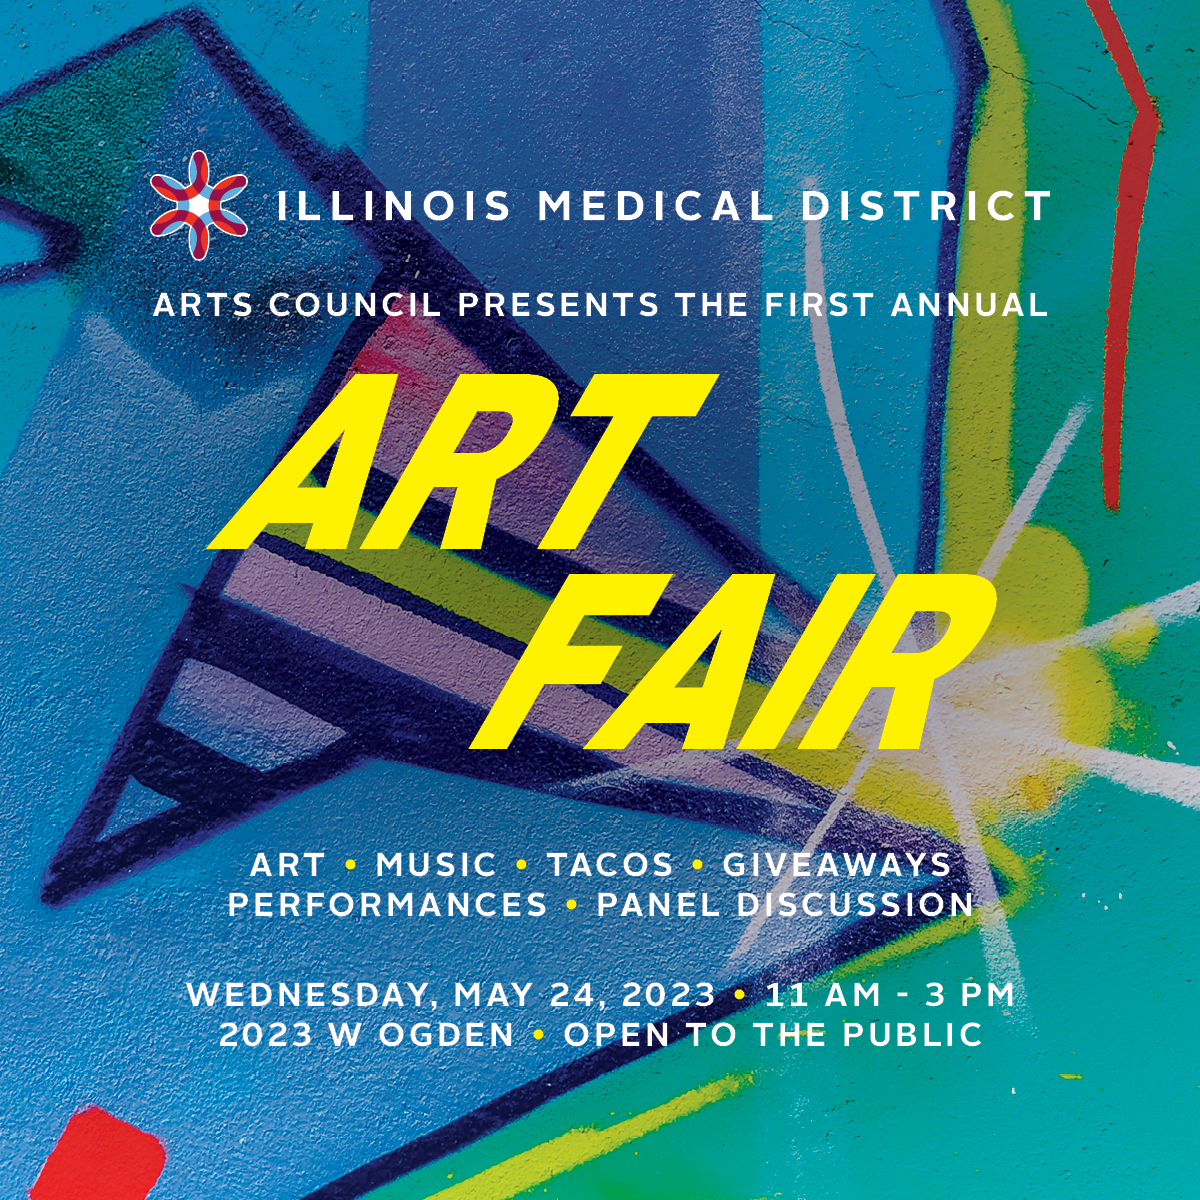 Illinois Medical District logo with text that reads "Arts Council presents the First Annual Art Fair, with art, music, tacos, giveaways, performances, panel discussions, on Wednesday, May 24, 2023 from 11 a.m. to 3 p.m. at 2023 W Ogden Avenue, open to the public".